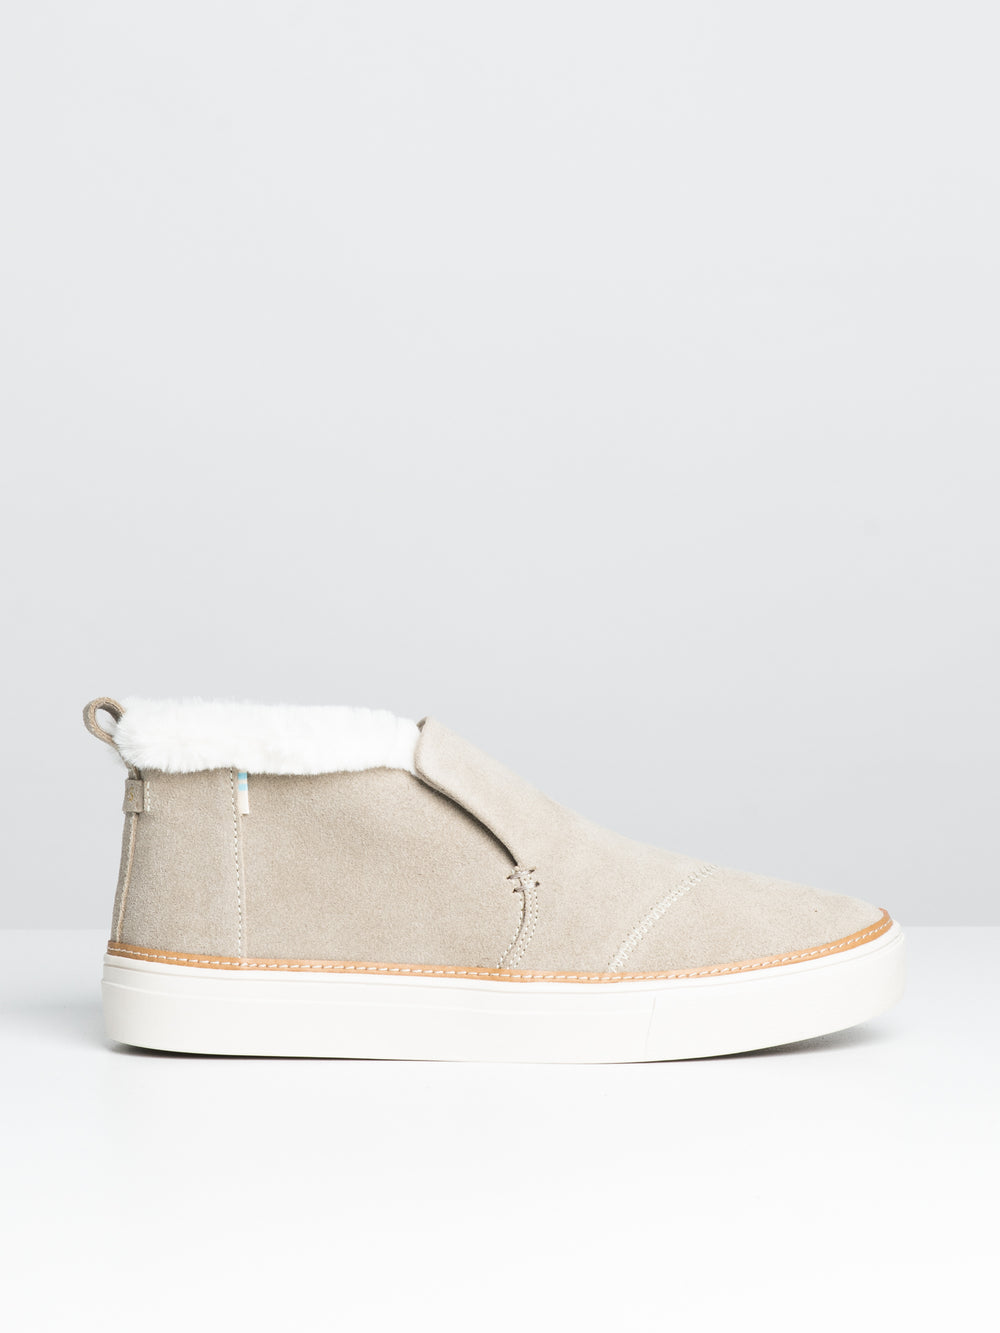 WOMENS PAXTON SNEAKER - CLEARANCE